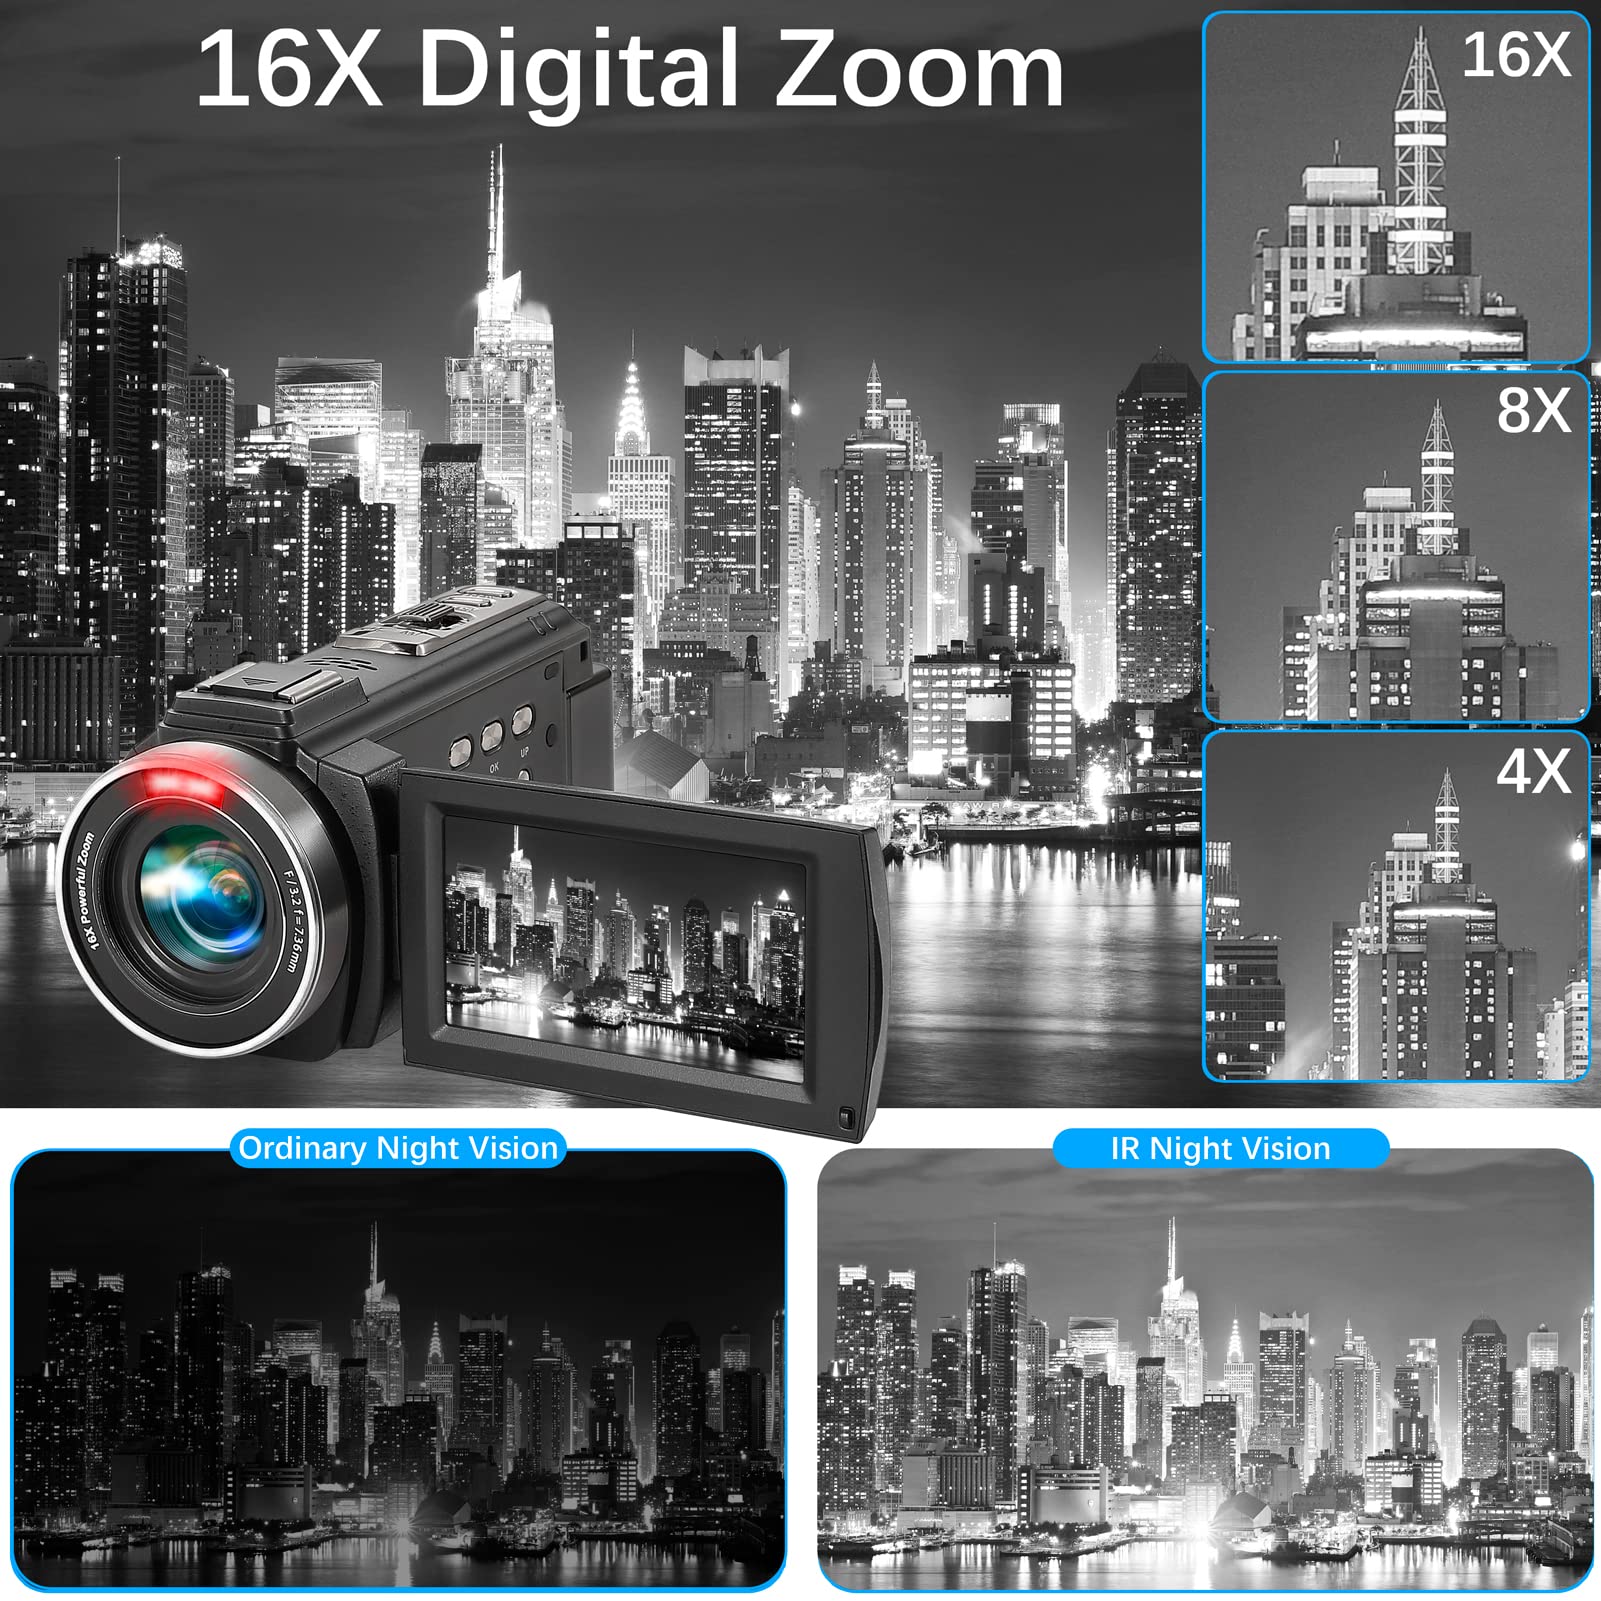 LKX Video Camera Camcorder Full HD 1080P 36.0 MP Webcam YouTube Vlogging Camera Recorder, 16X Digital Zoom Touch Screen Camcorders Camera with Microphone, Remote, Stabilizer, Lens Hood, 2 Batteries